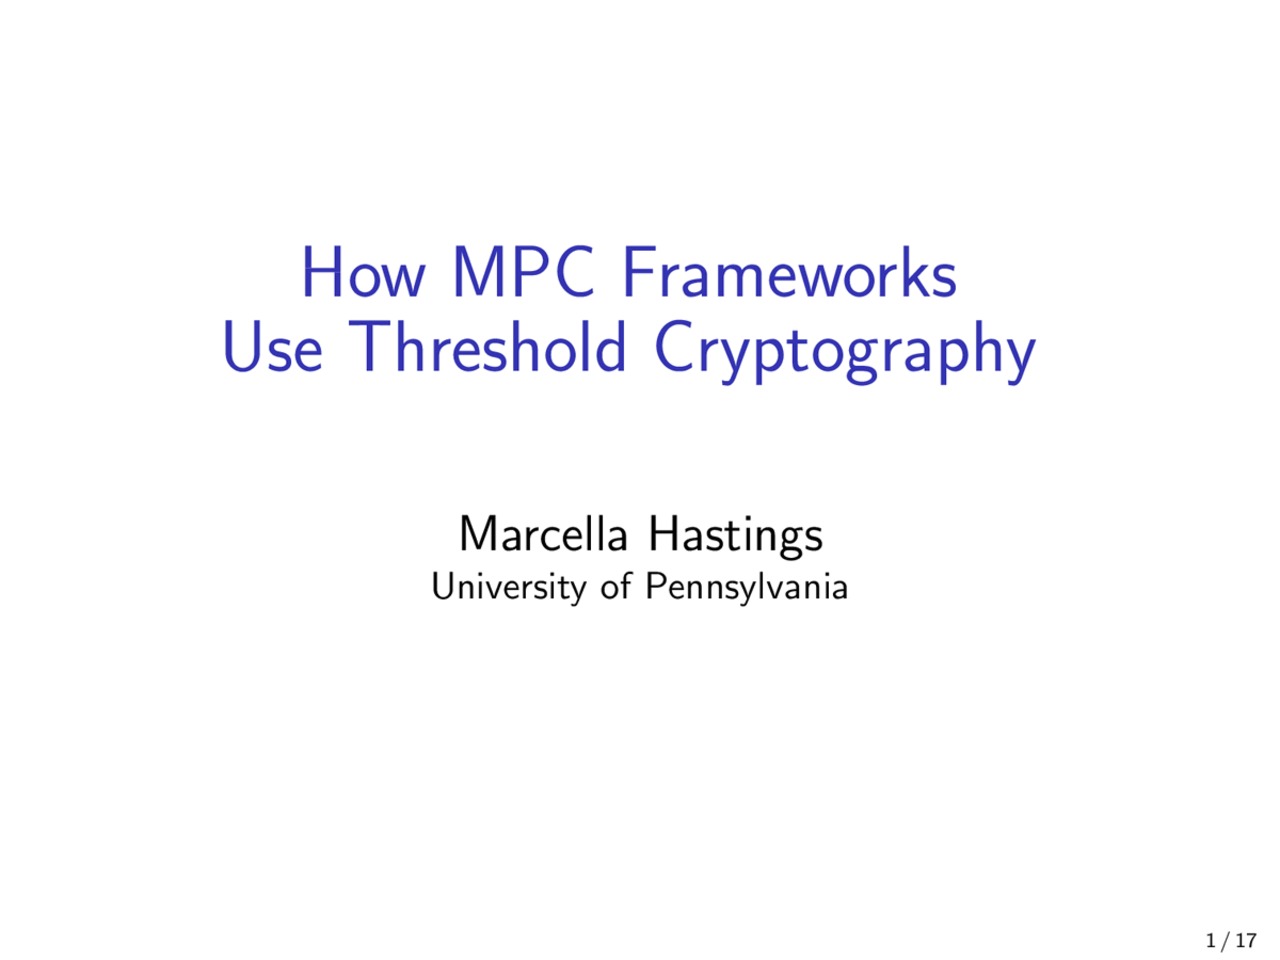 MPTS 2020 Talk 3b3: How MPC Frameworks Use Threshold Cryptography